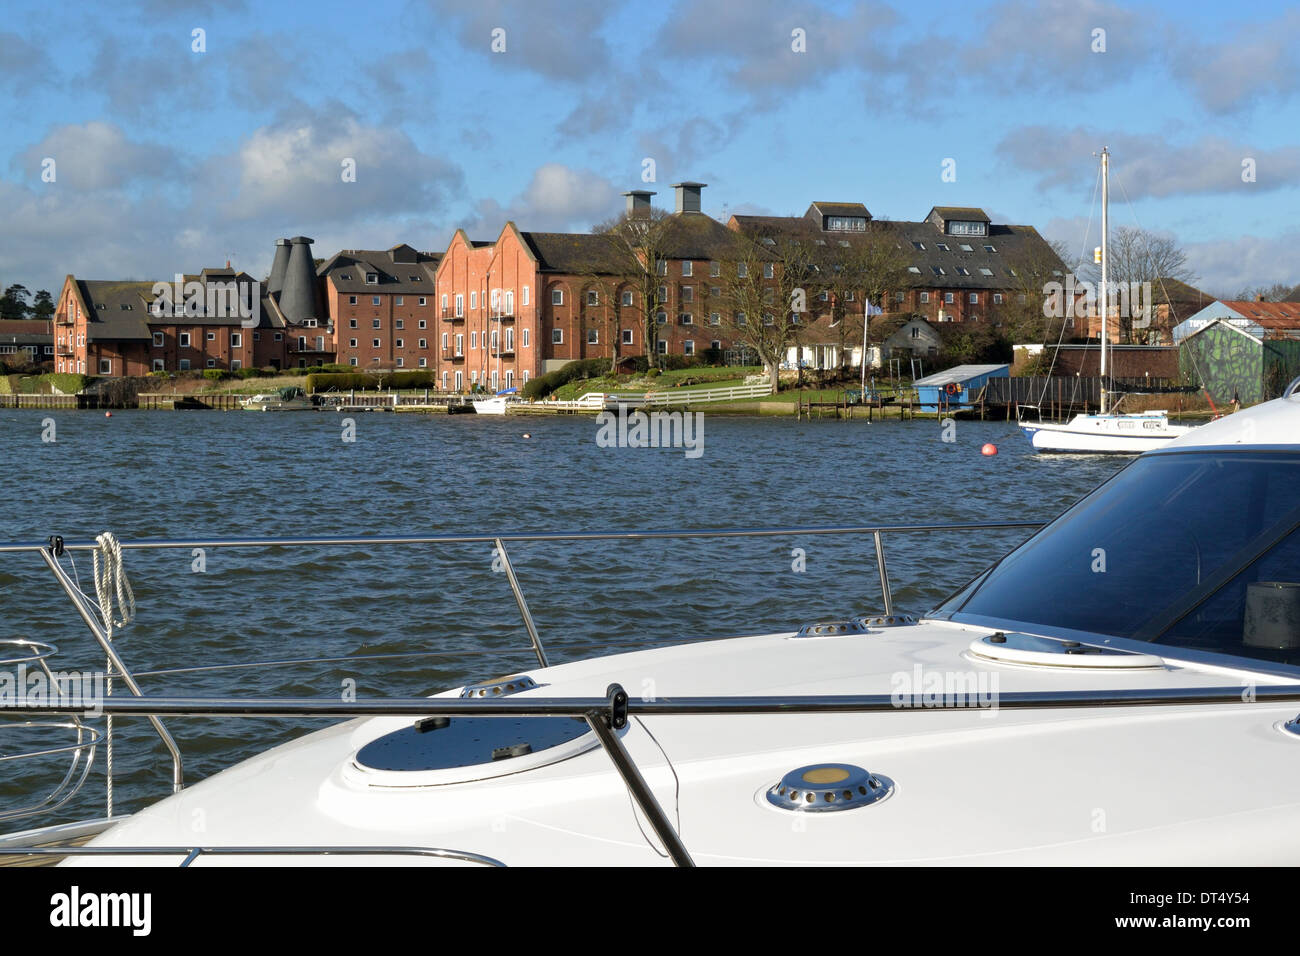 Looking across Oulton Broad, Suffolk, towards the Old Maltings from a motor boat moored at the Wherry Hotel, Broads National Park Stock Photo